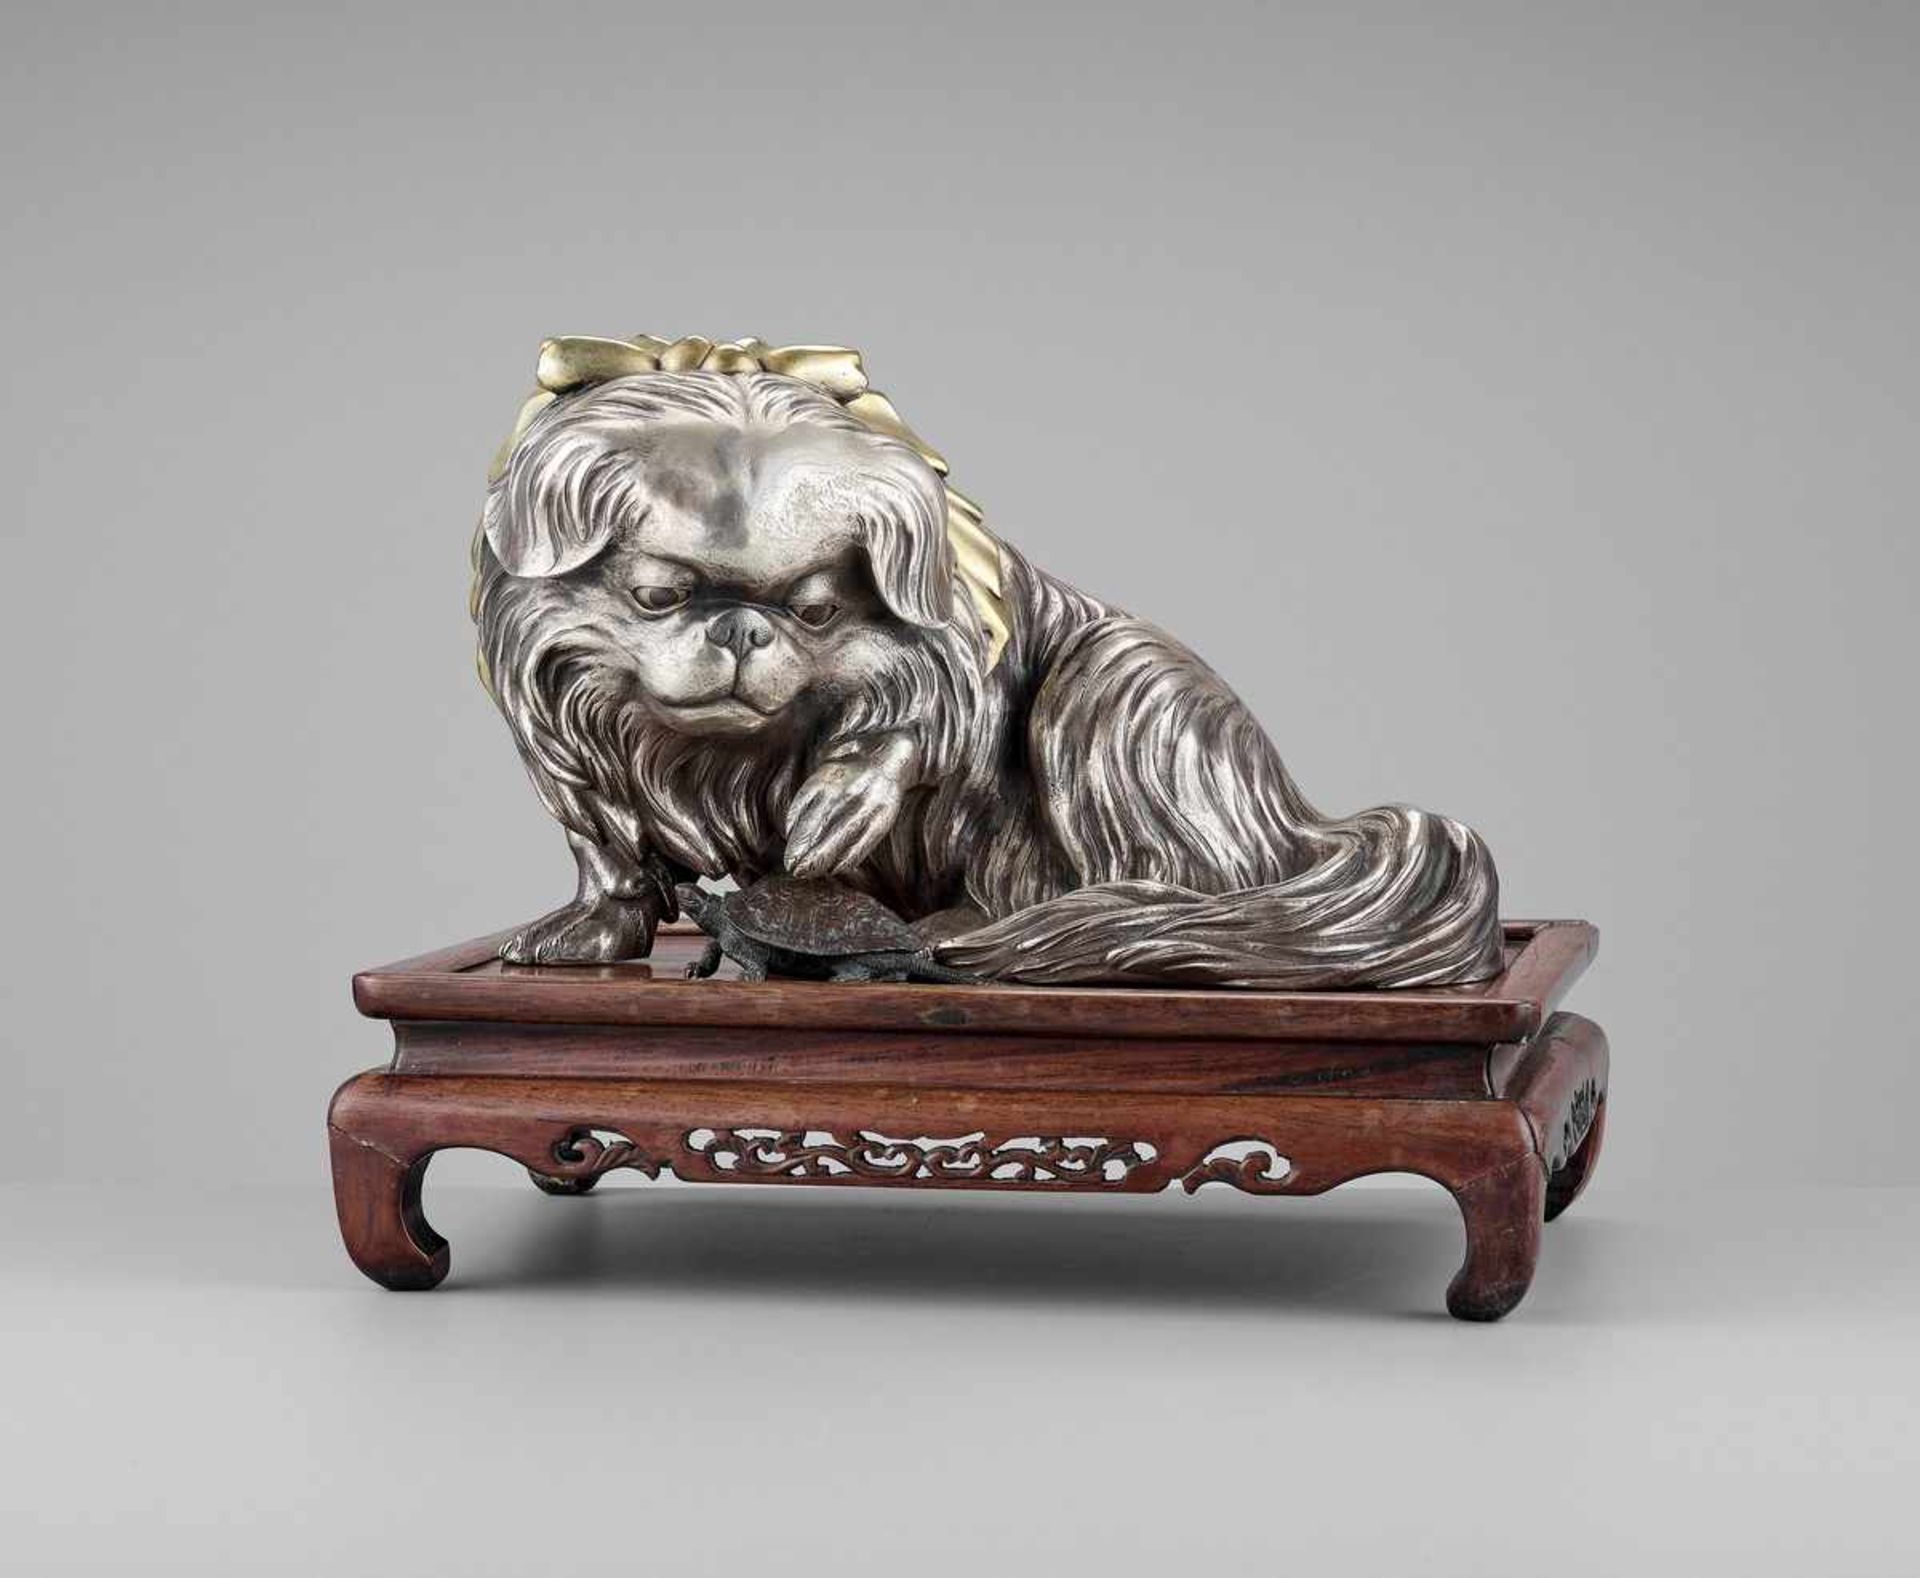 MARUKI COMPANY: AN EXCEPTIONAL AND LARGE PARCEL-GILT AND SILVERED OKIMONO OF A CHIN DOG By the